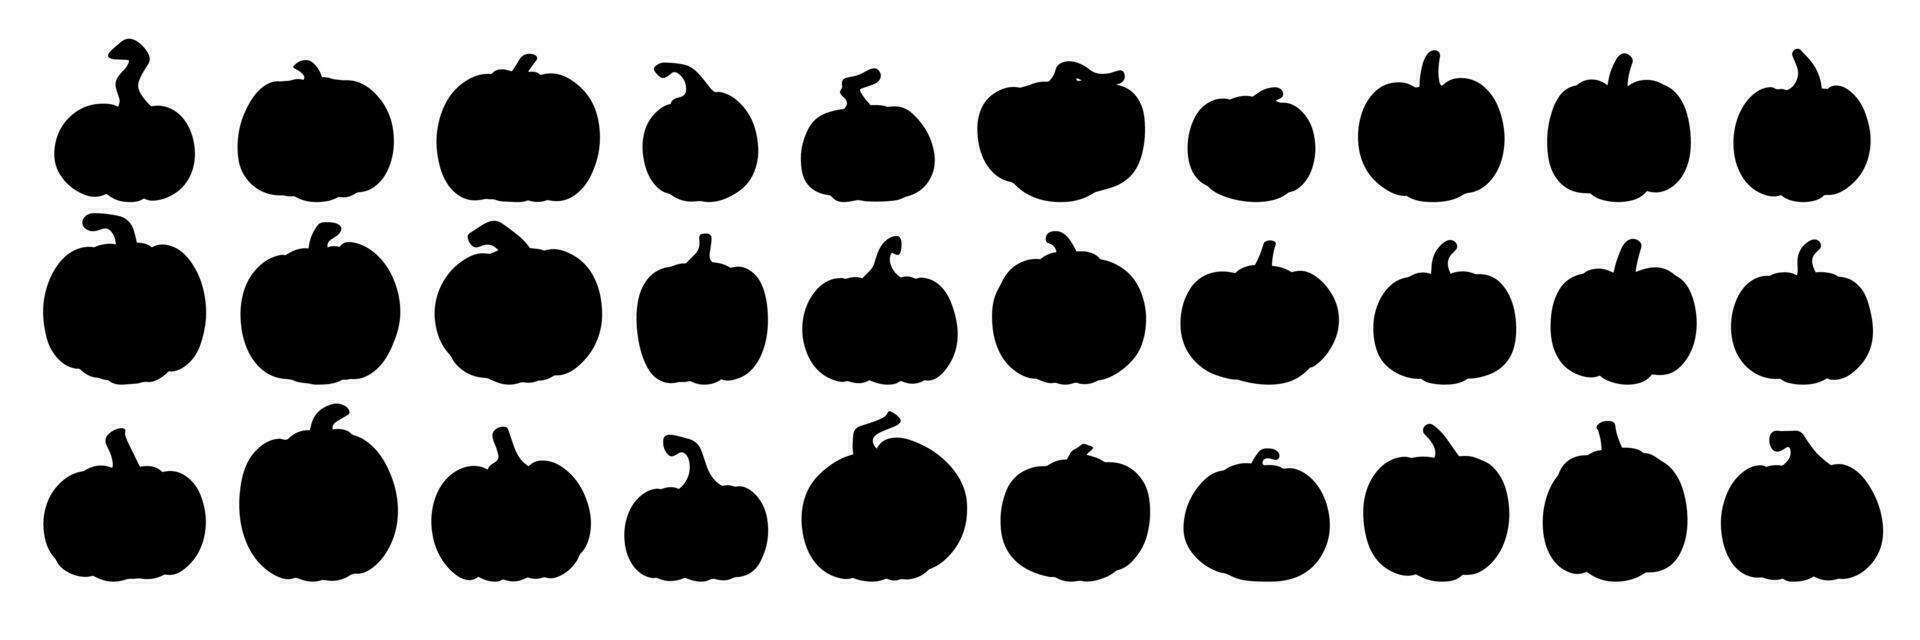 Large collection of pumpkin silhouette. Big set of pumpkin silhouette. Vector illustration